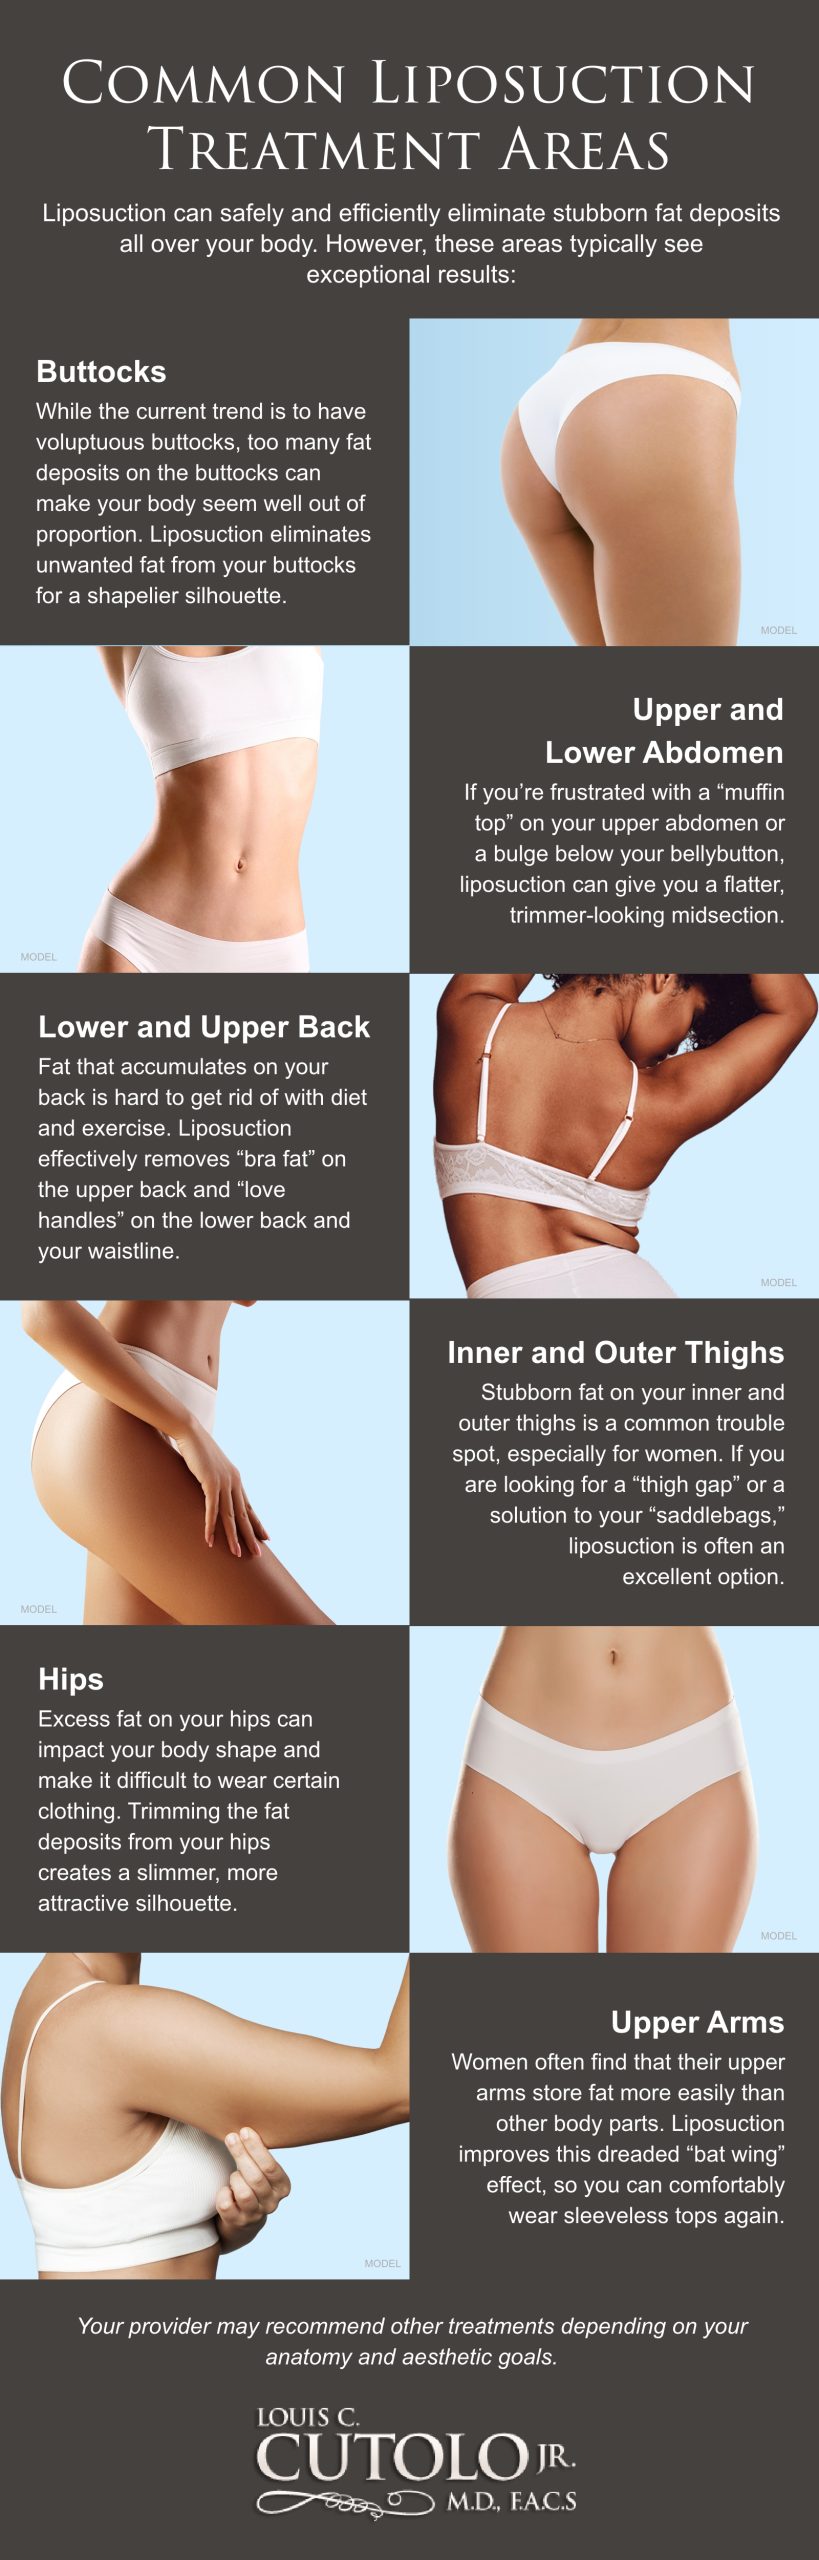 Infographic of common liposuction treatment areas including: buttocks, upper and lower abdomen, lower and upper back, inner and outer thighs, hips, and upper arms. (MODELS)